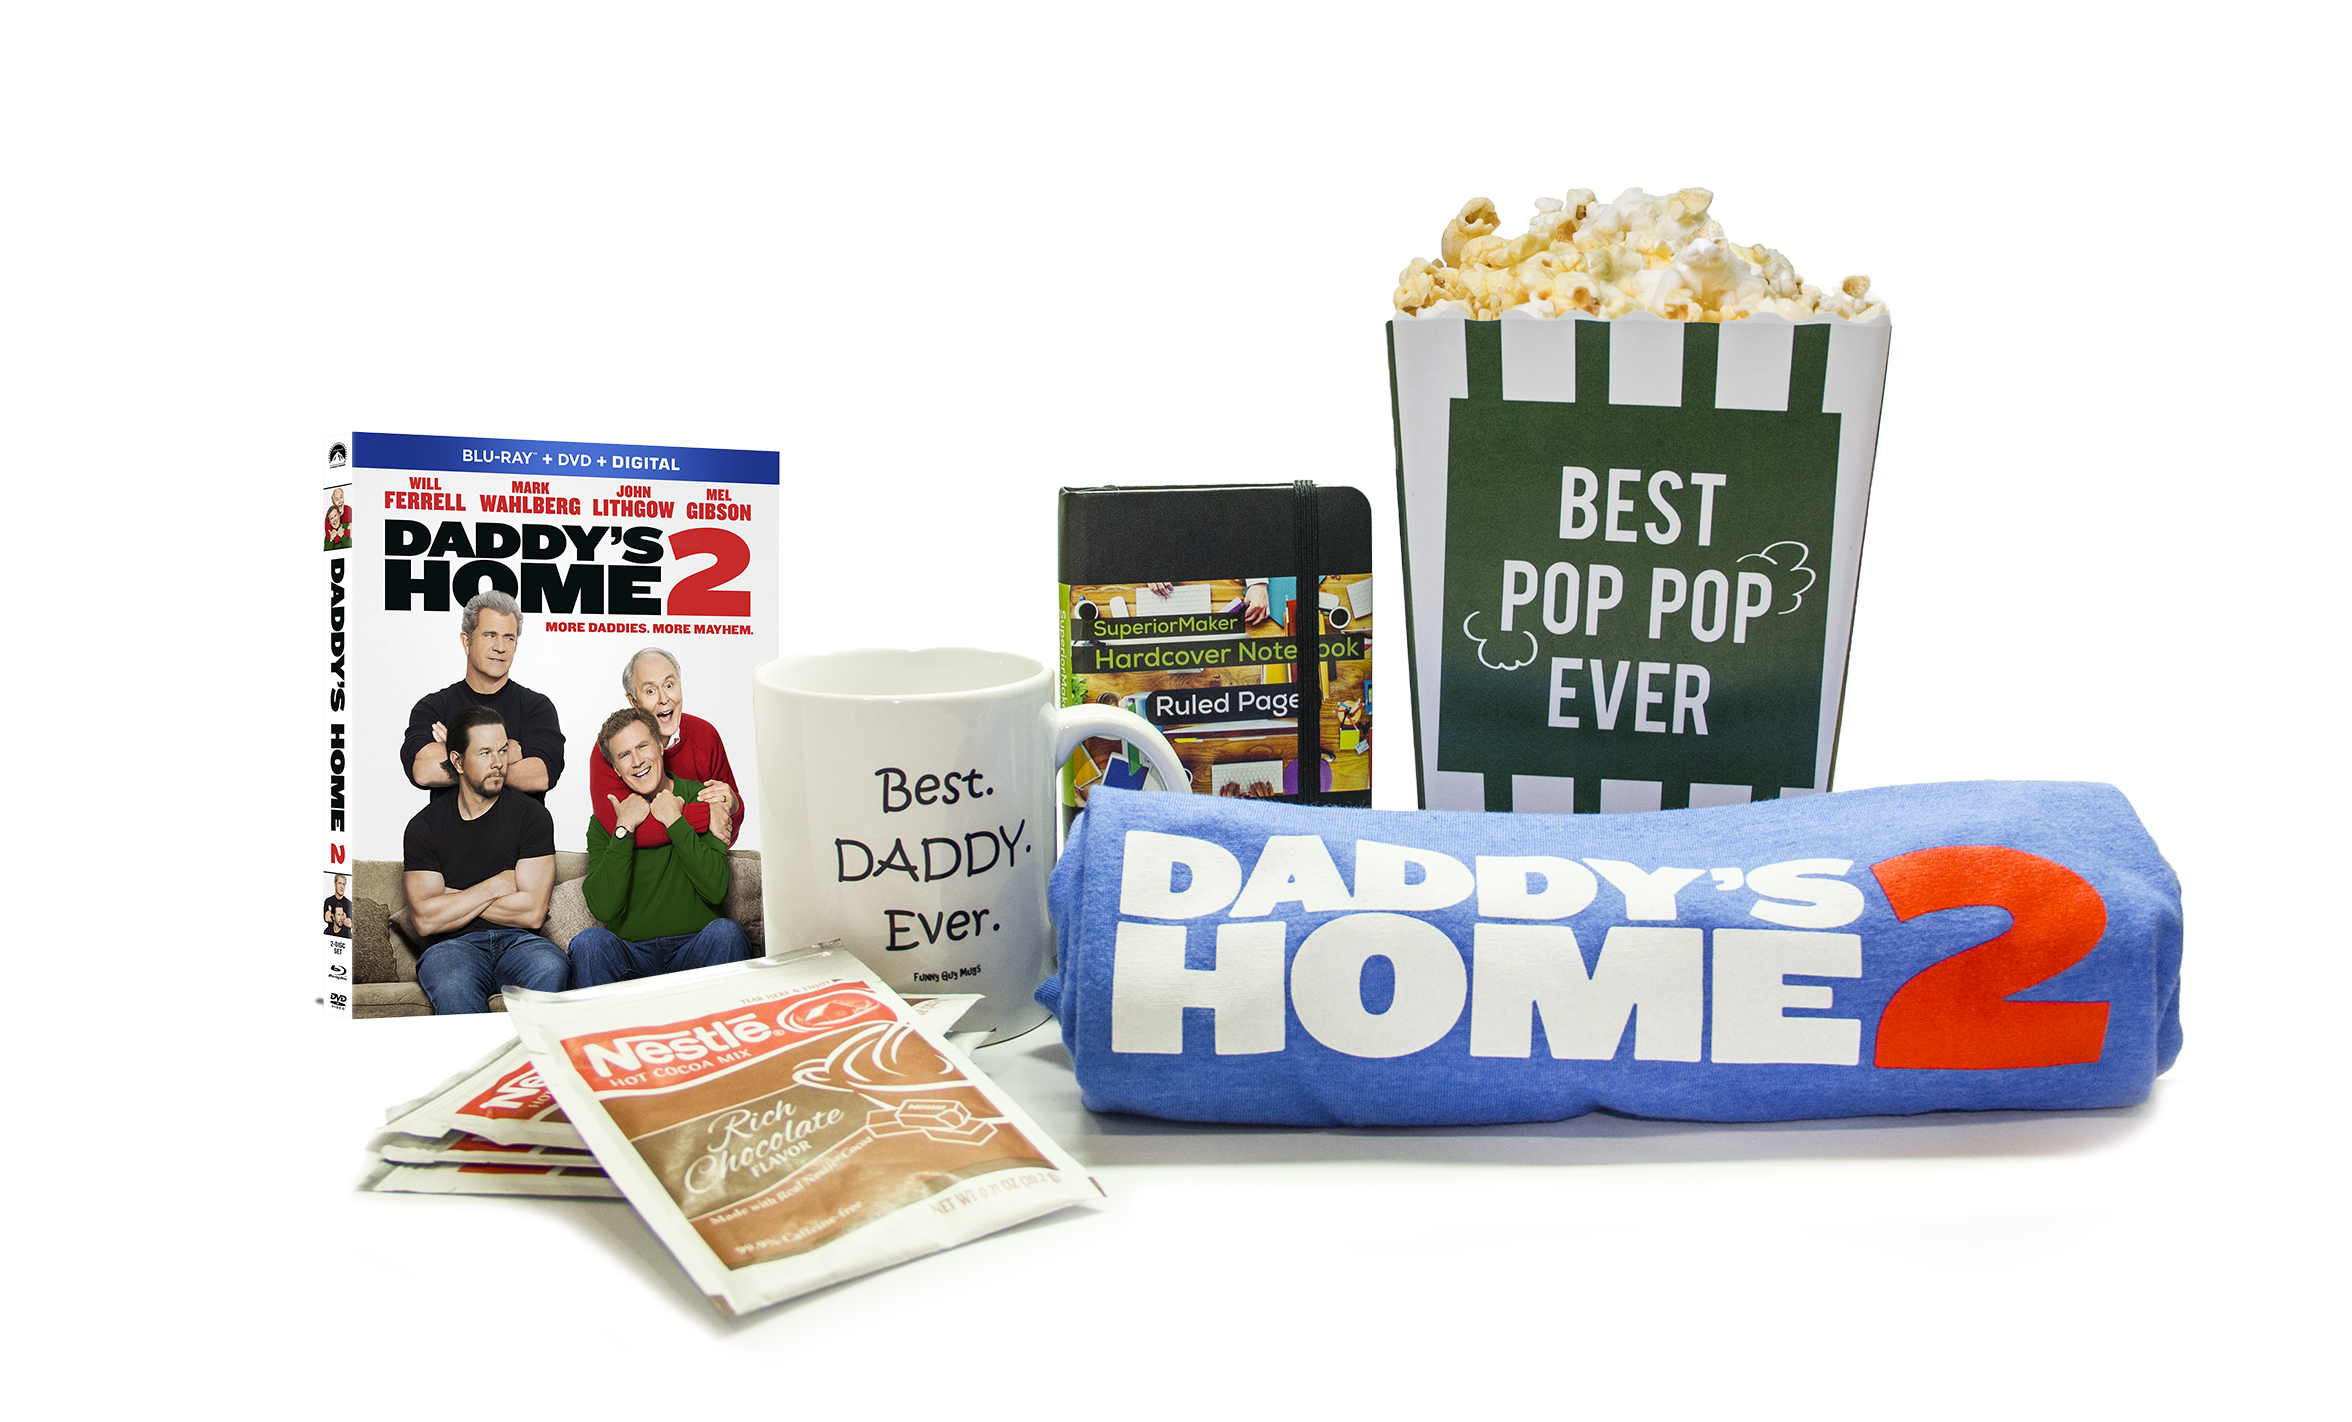 New Movie Daddy’s Home 2 is on Blu-ray and DVD – Giveaway